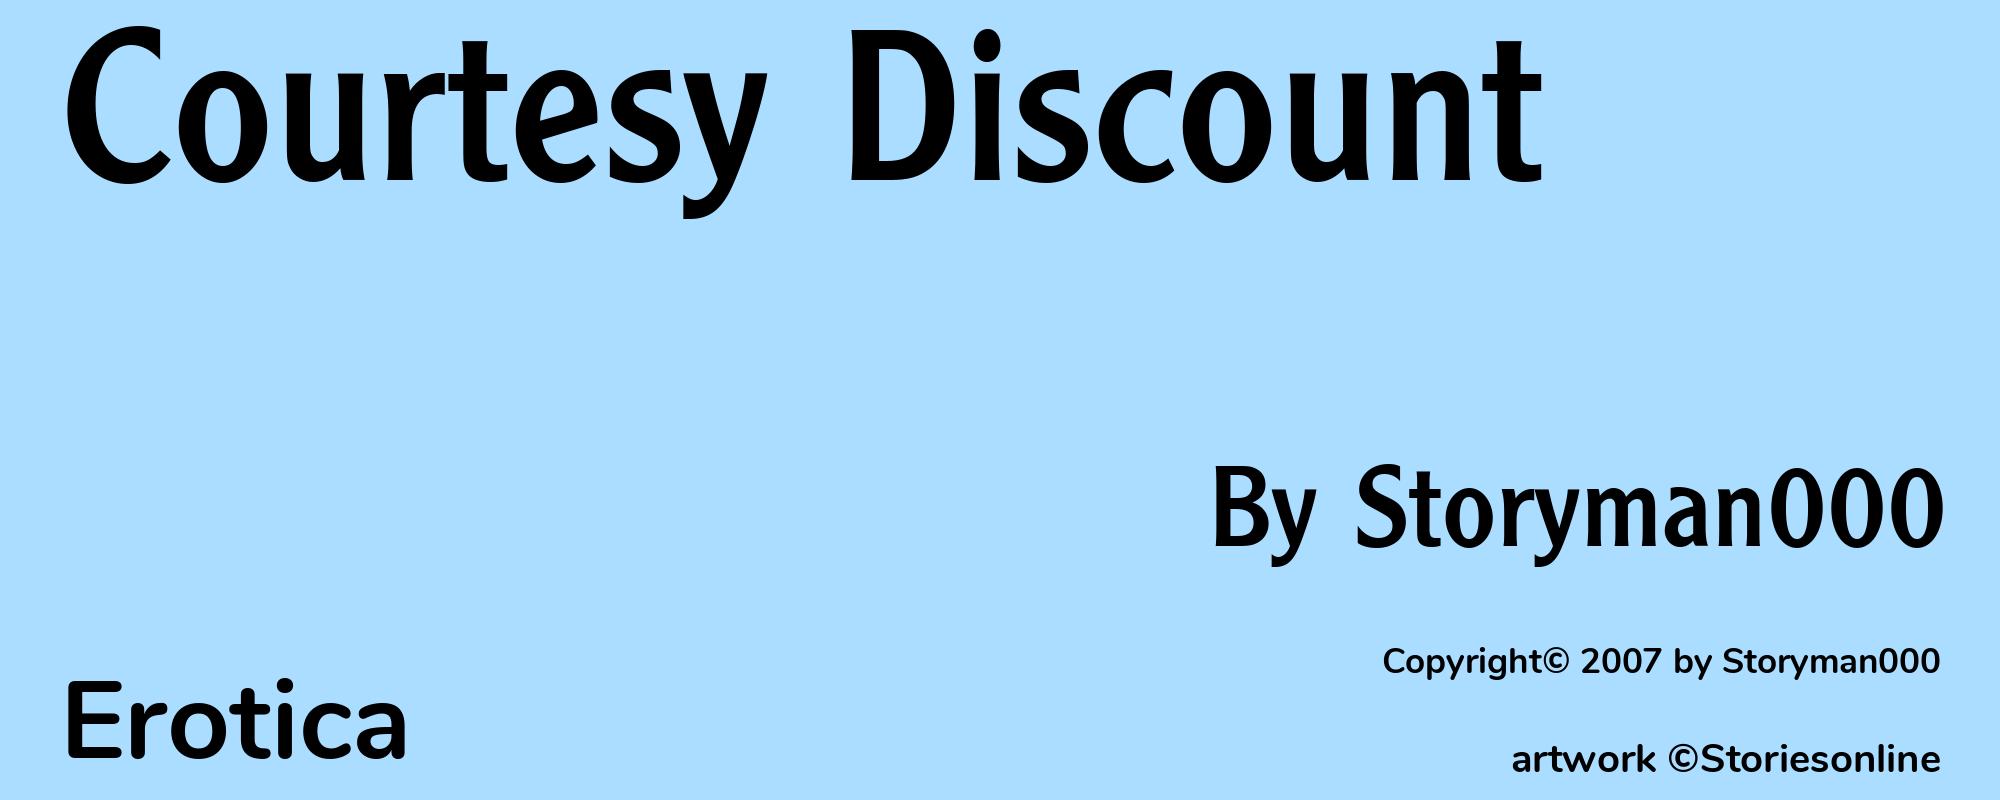 Courtesy Discount - Cover